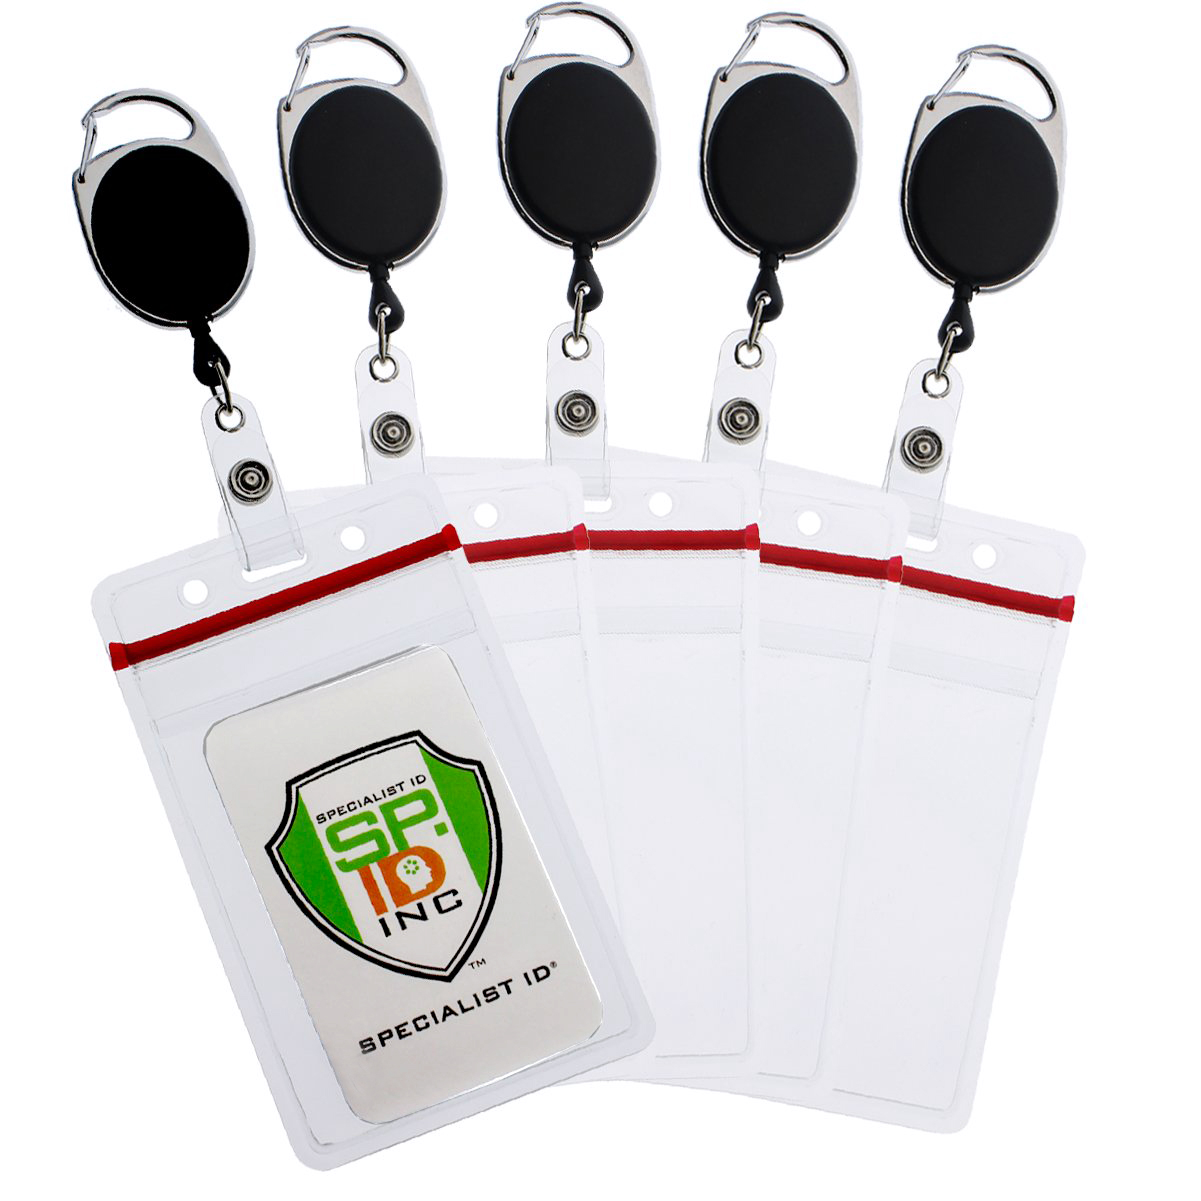 by Specialist ID Specialist ID Carabiner Badge Reel with Vertical Multi Card Badge Holder and Key Ring Clear